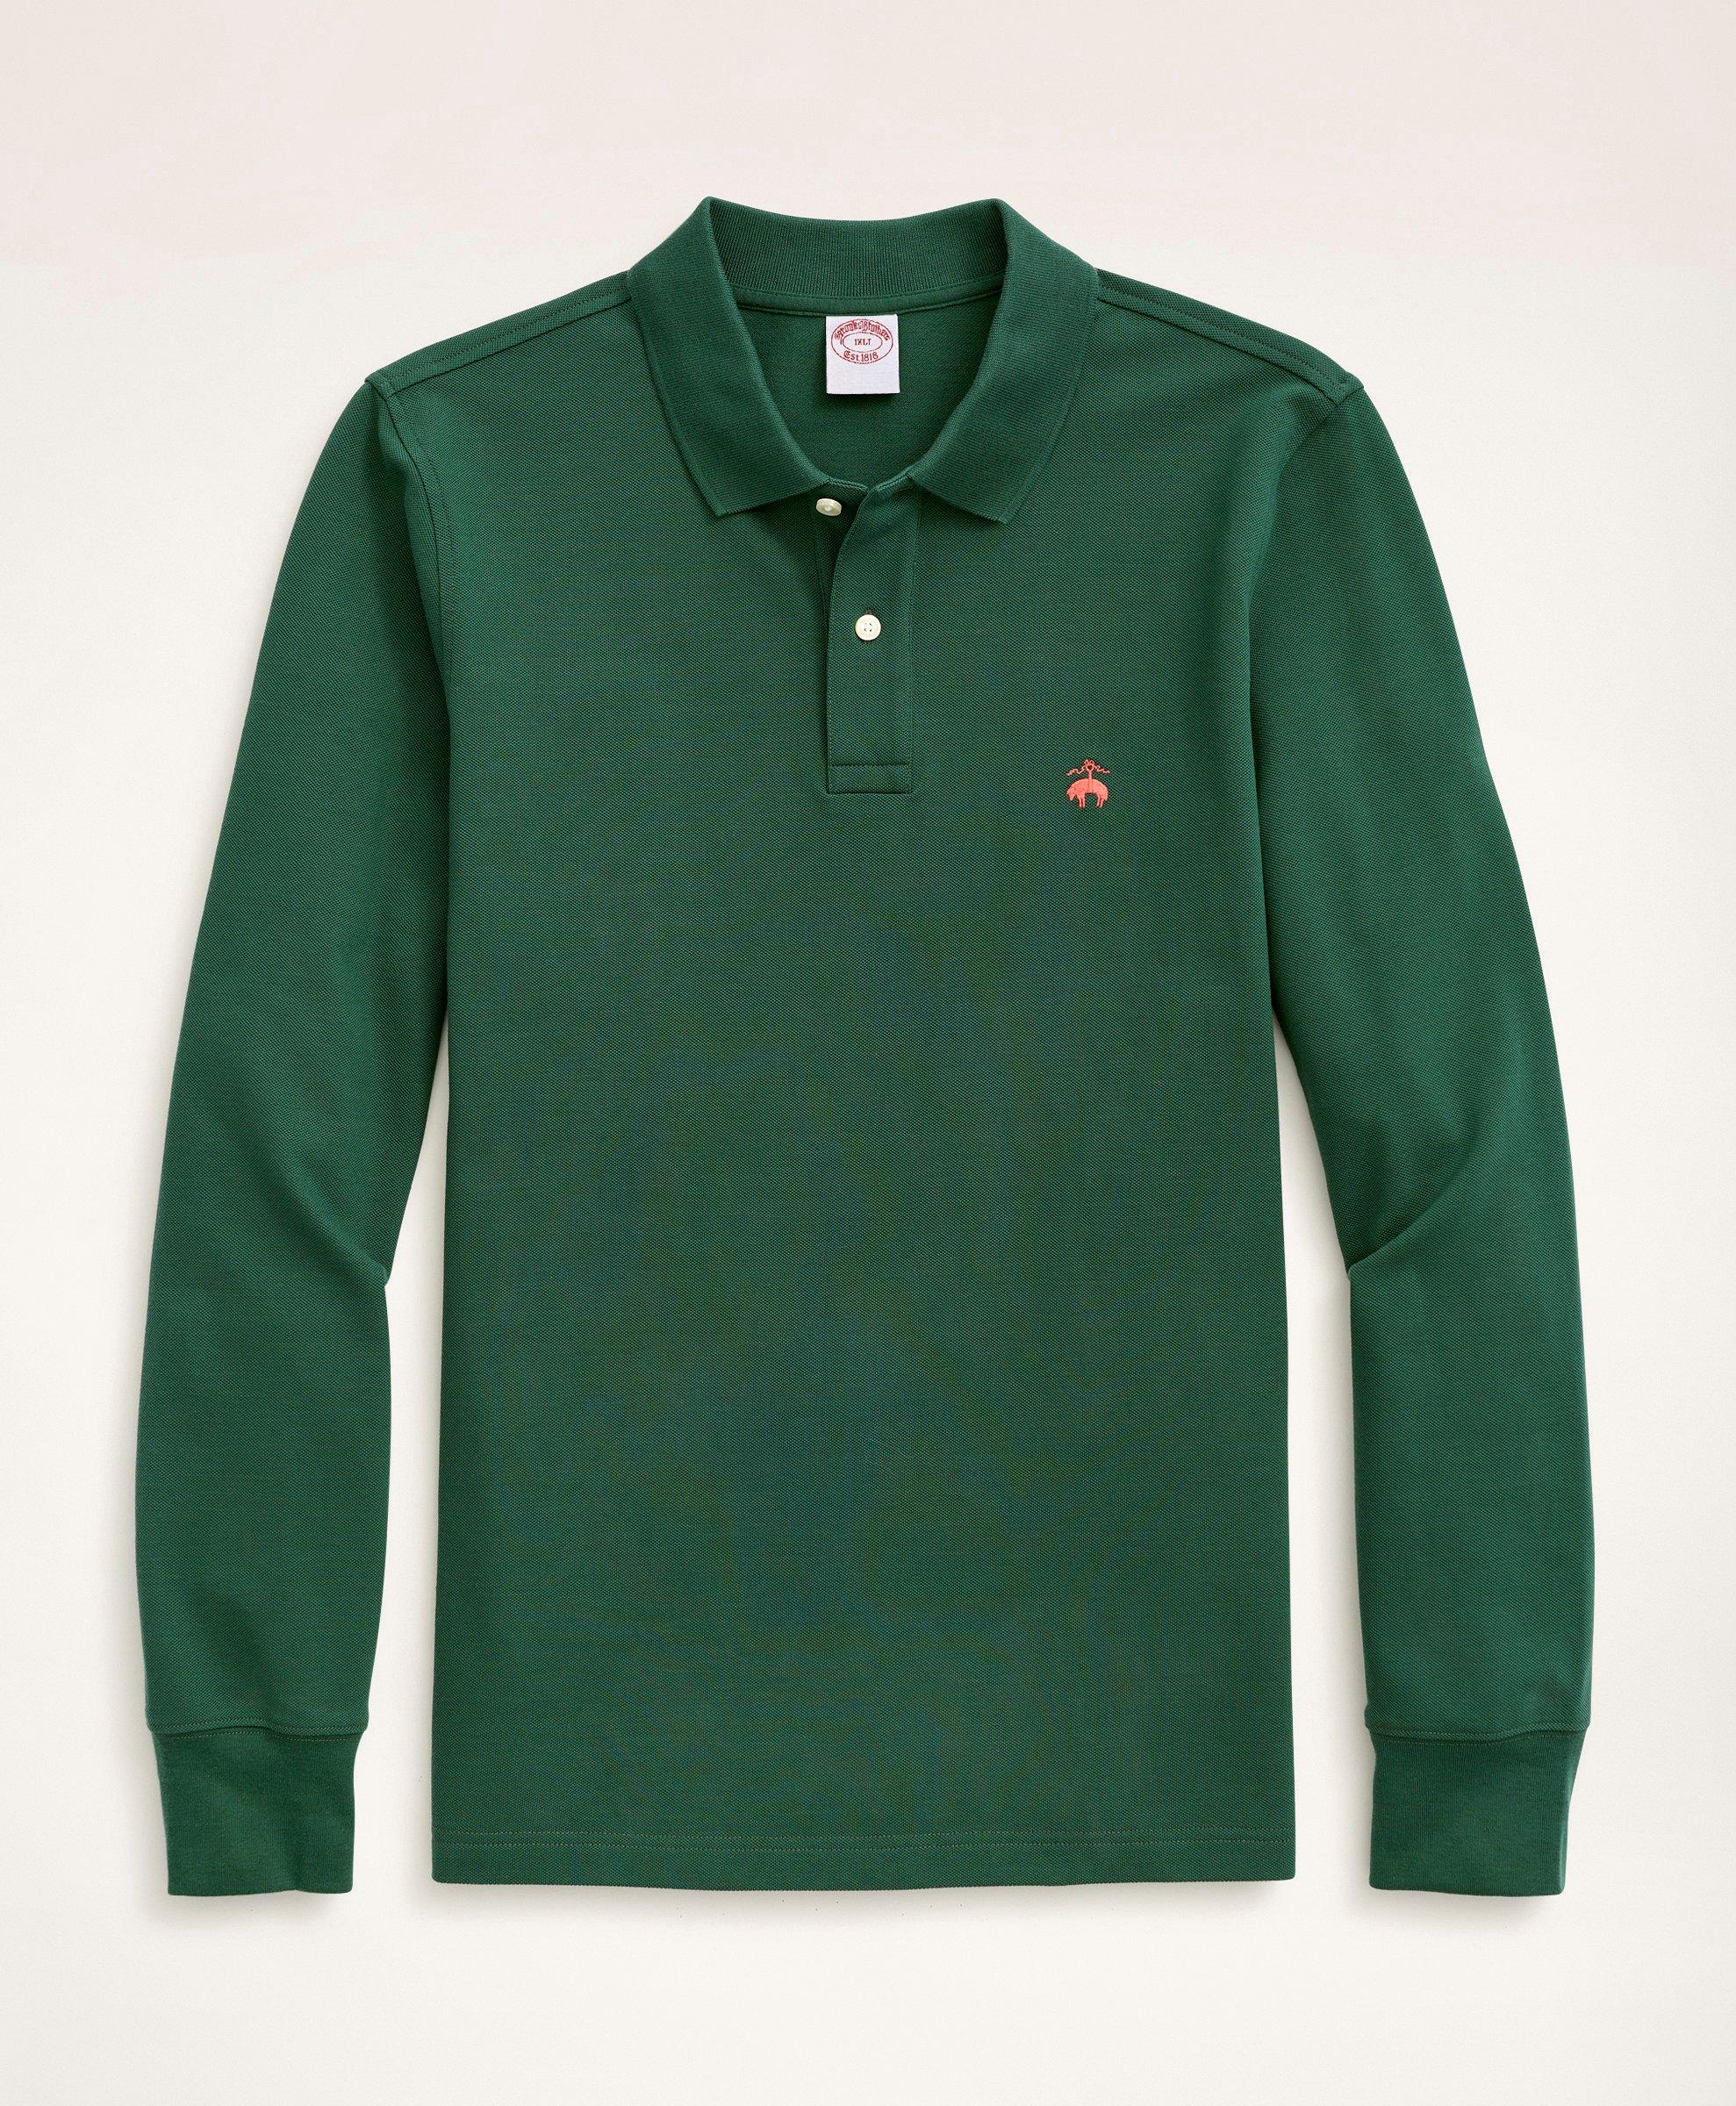 Brooks Brothers Big & Tall Long-sleeve Stretch Cotton Polo | Green | Size 4x Tall